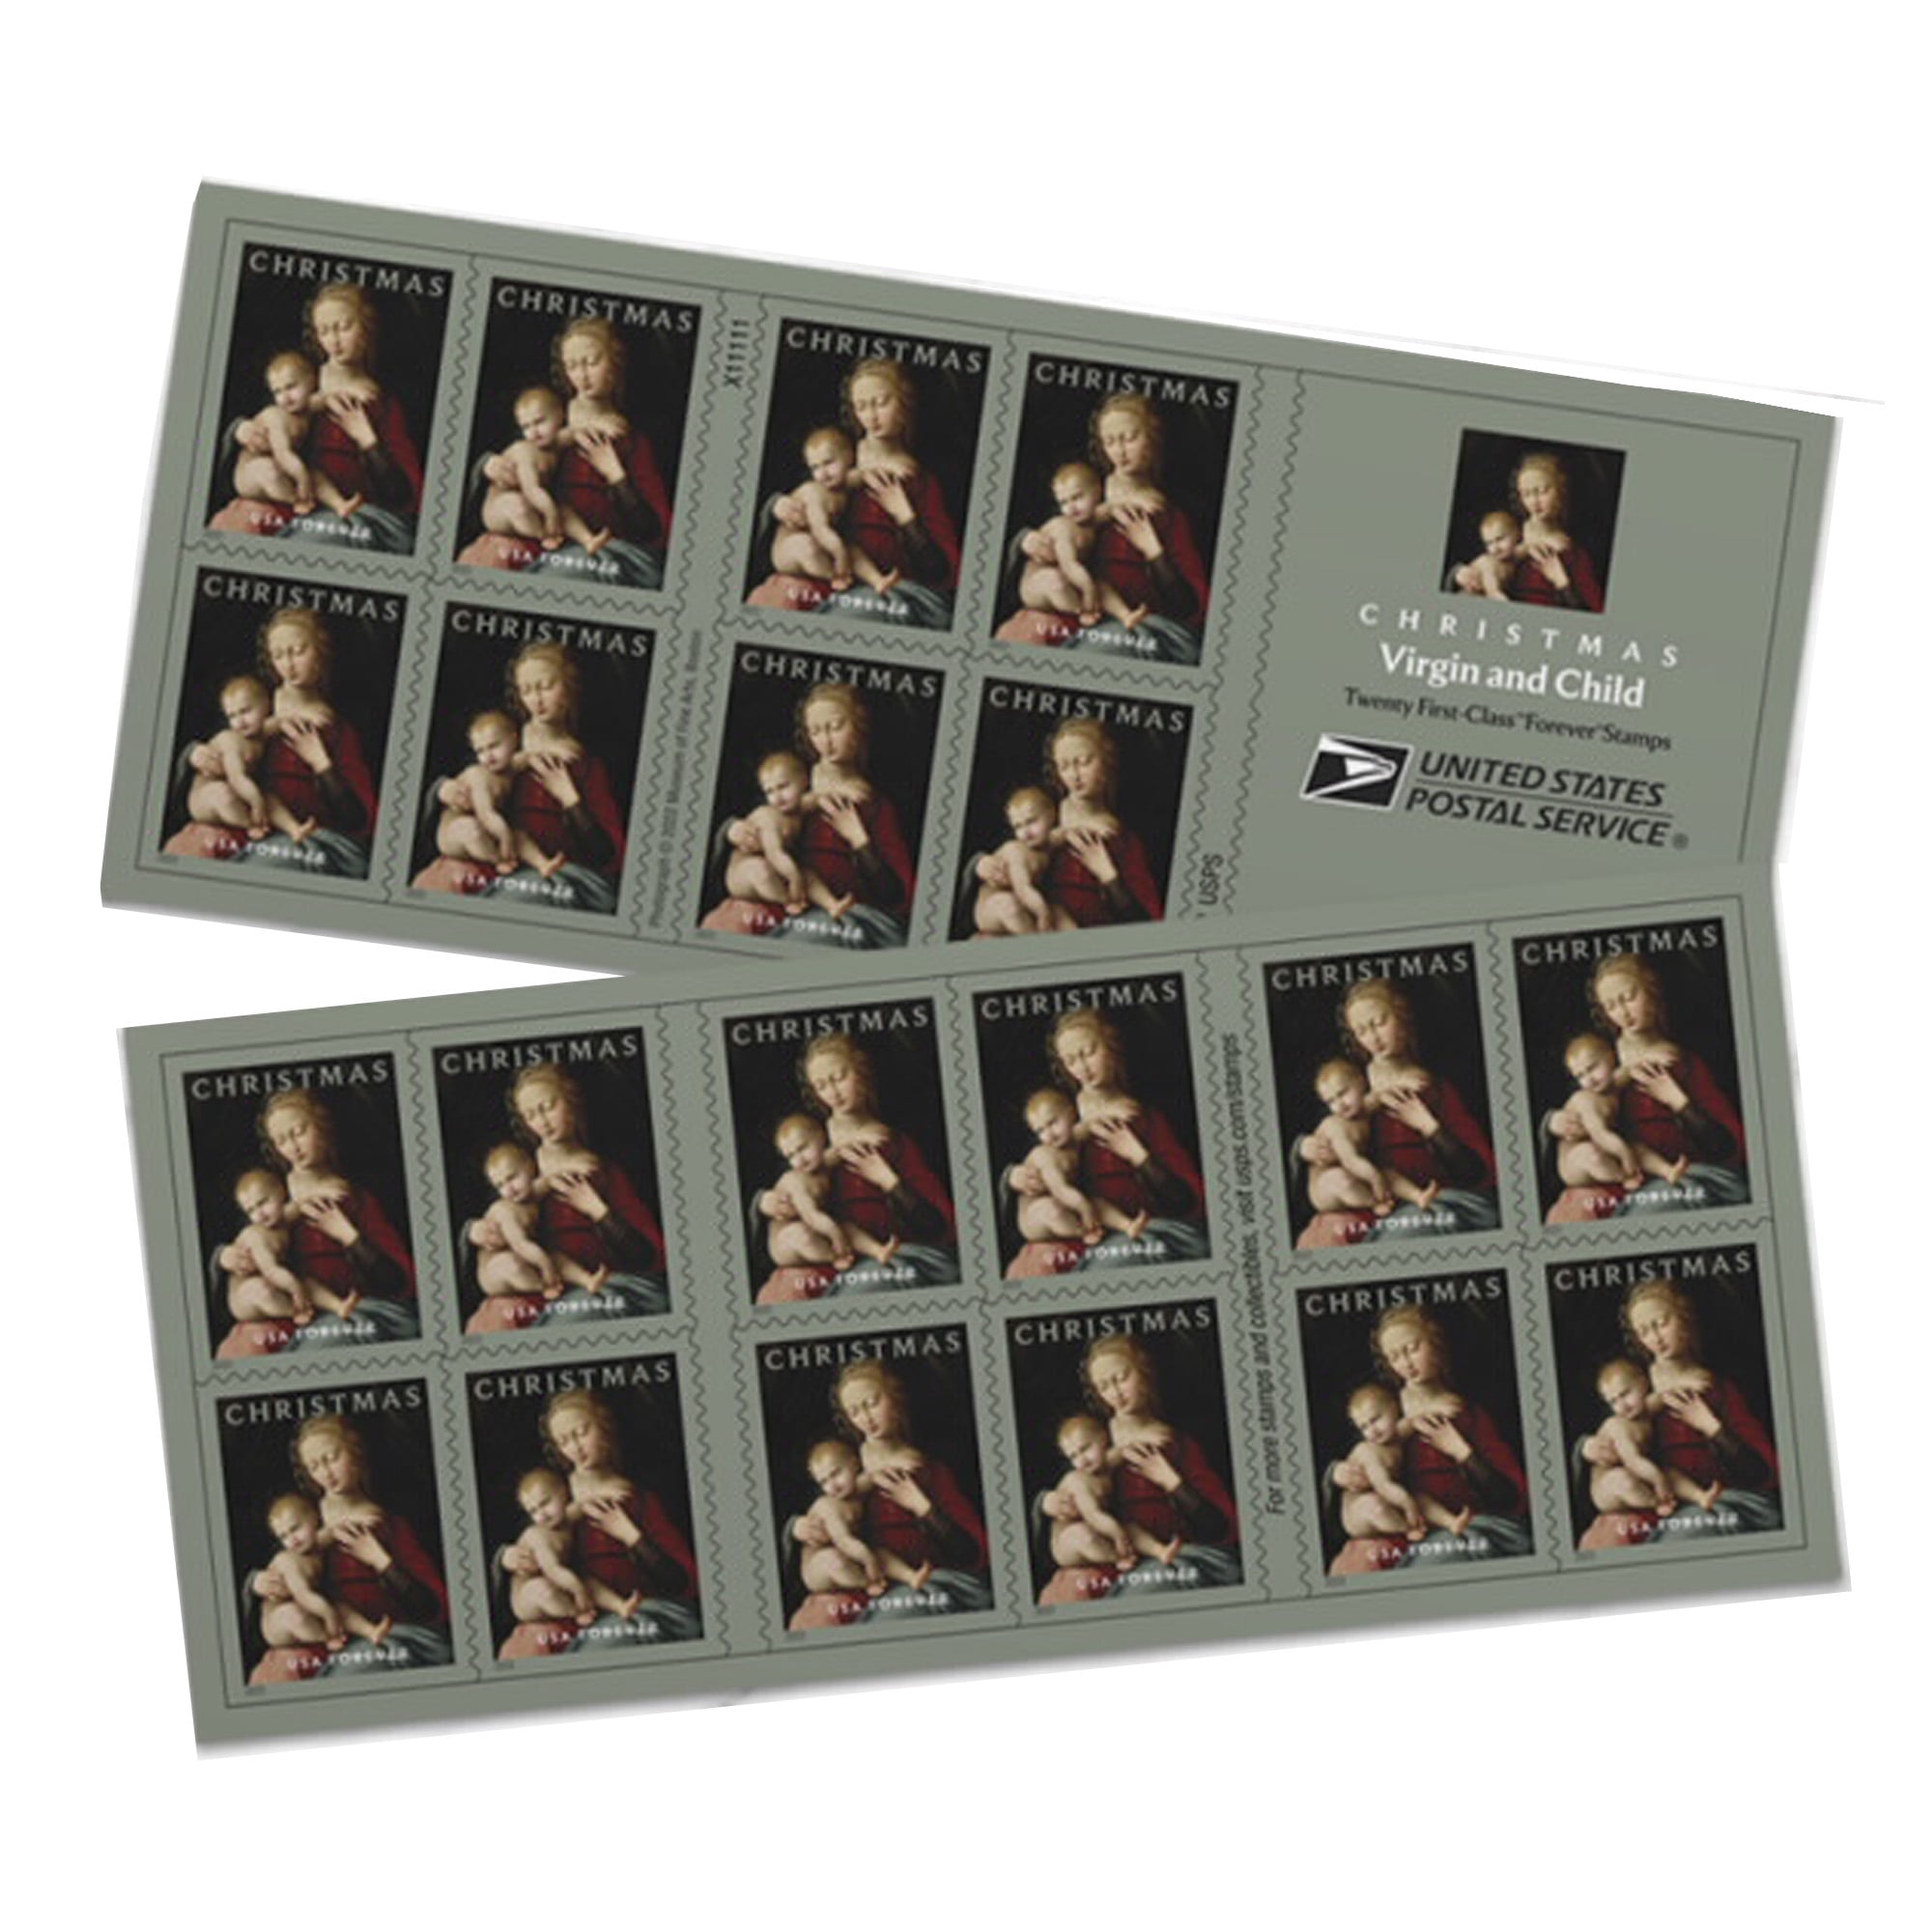 Generic Winter Scenes Forever Postage Stamps 2 Books of 20 First Class US  Postal Holiday Celebrations Wedding Celebration Anniversary Traditions (40